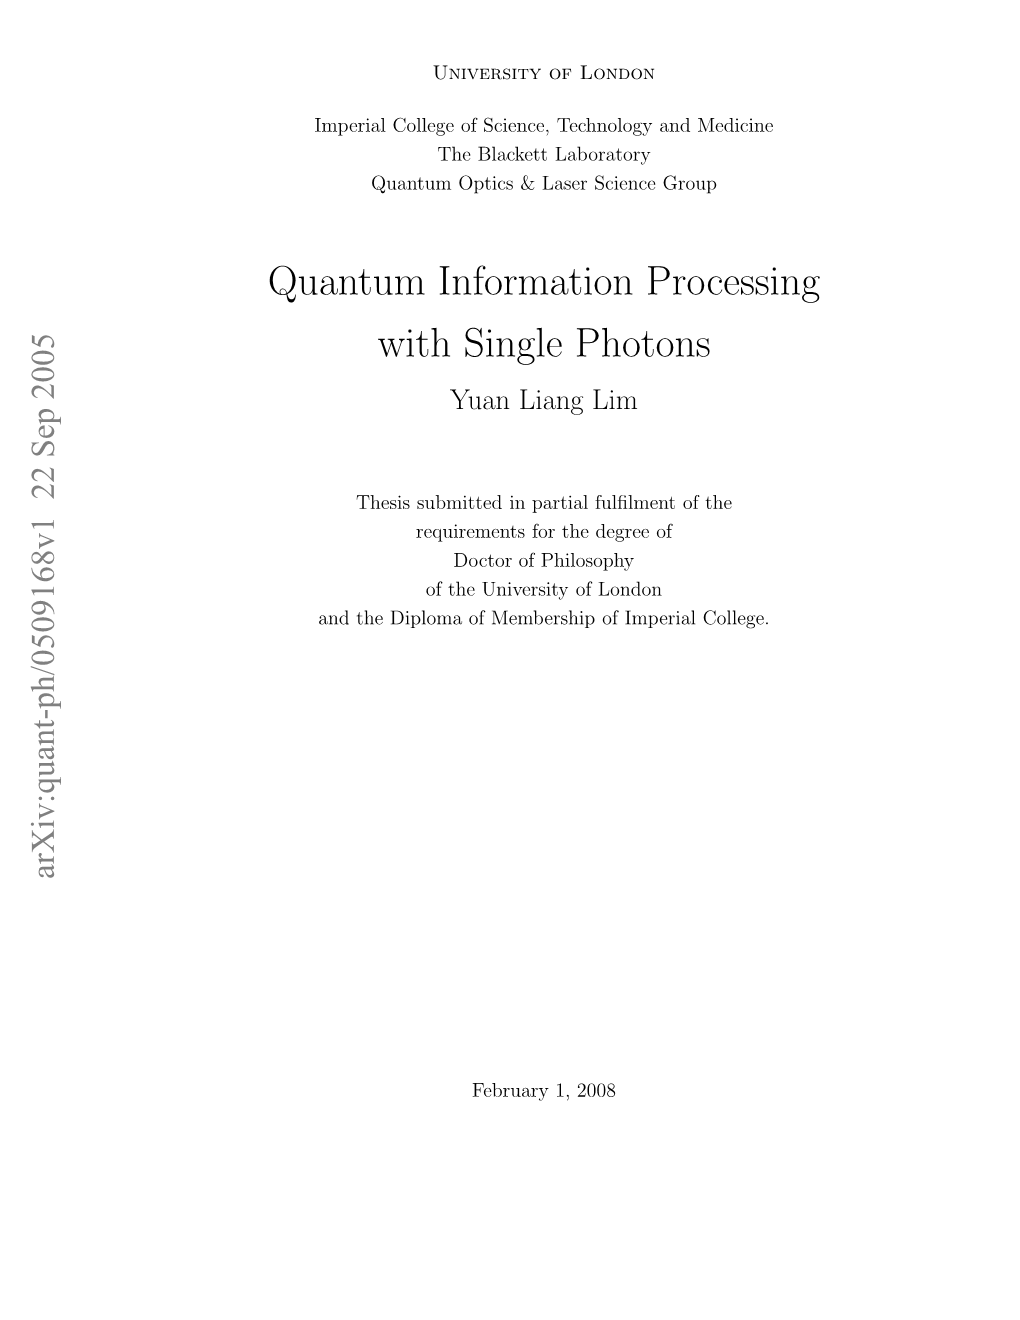 Quantum Information Processing with Single Photons